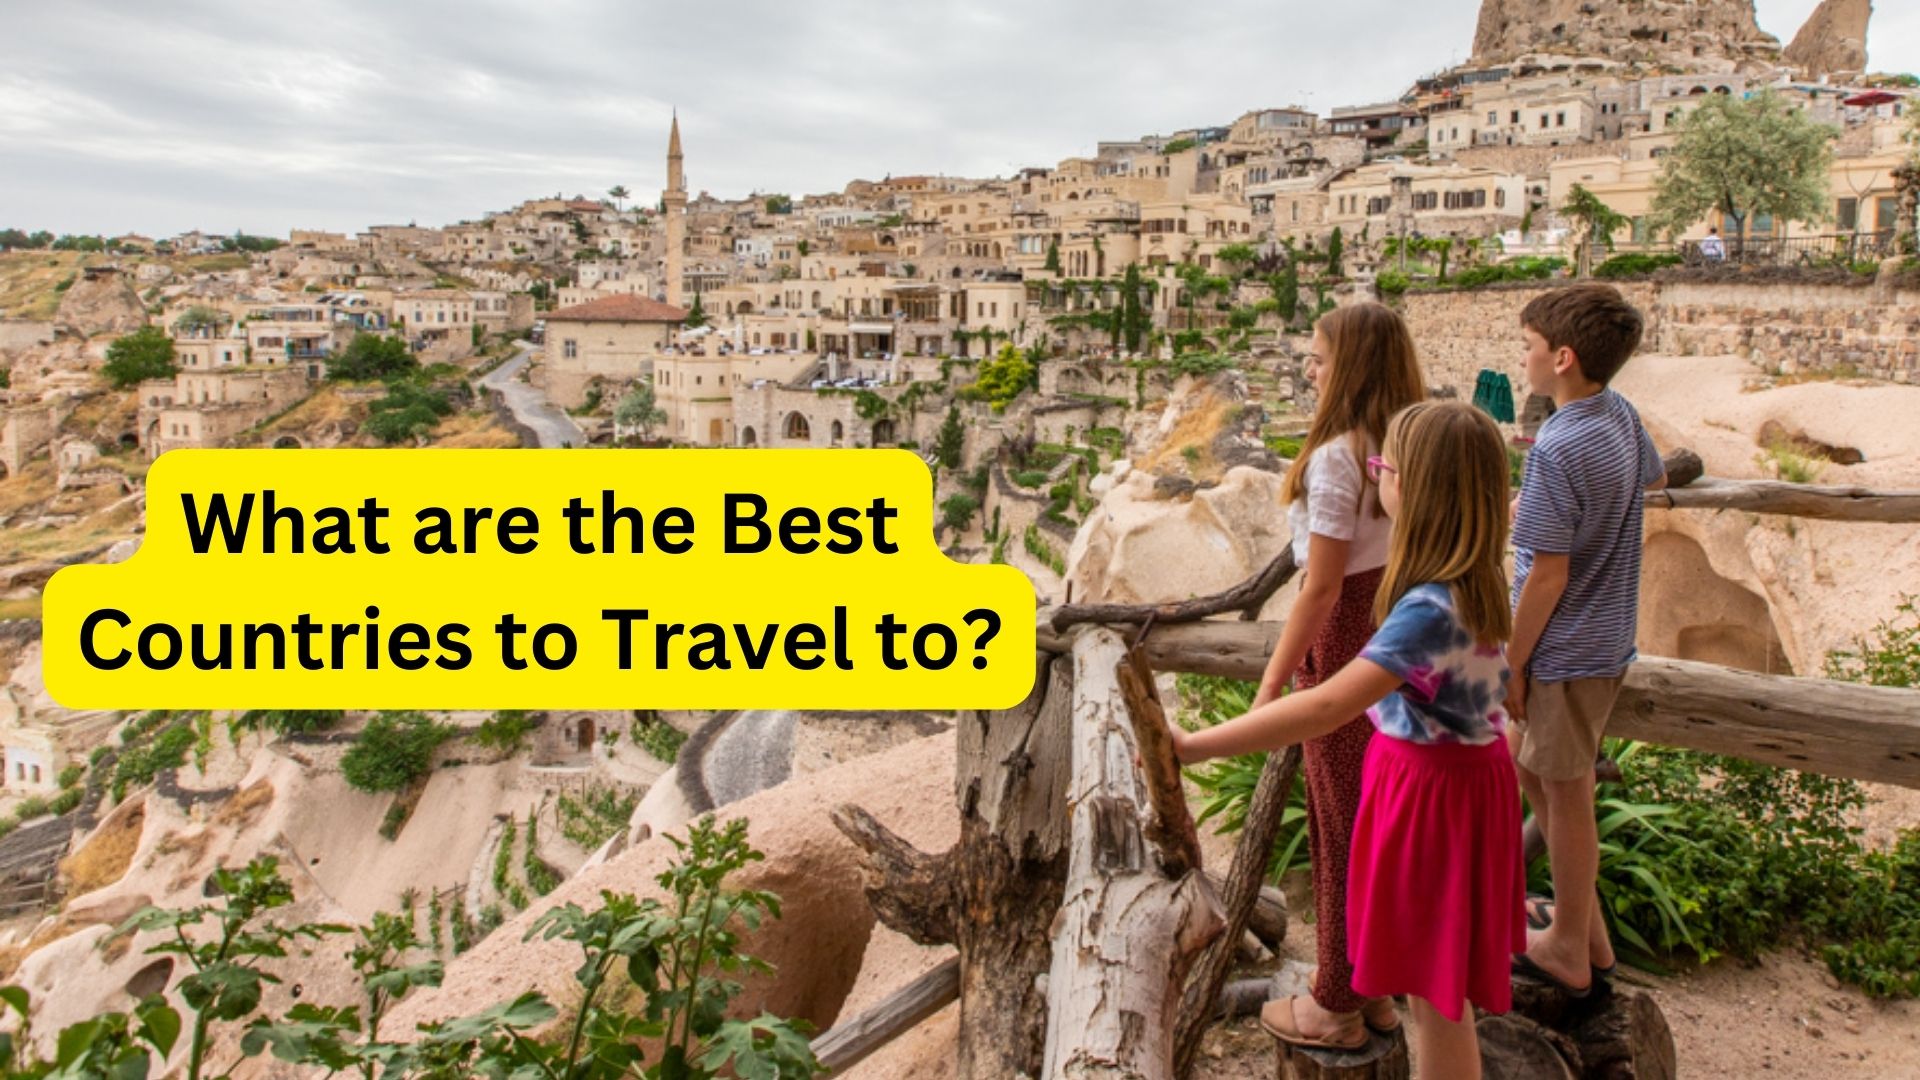 What are the Best Countries to Travel to